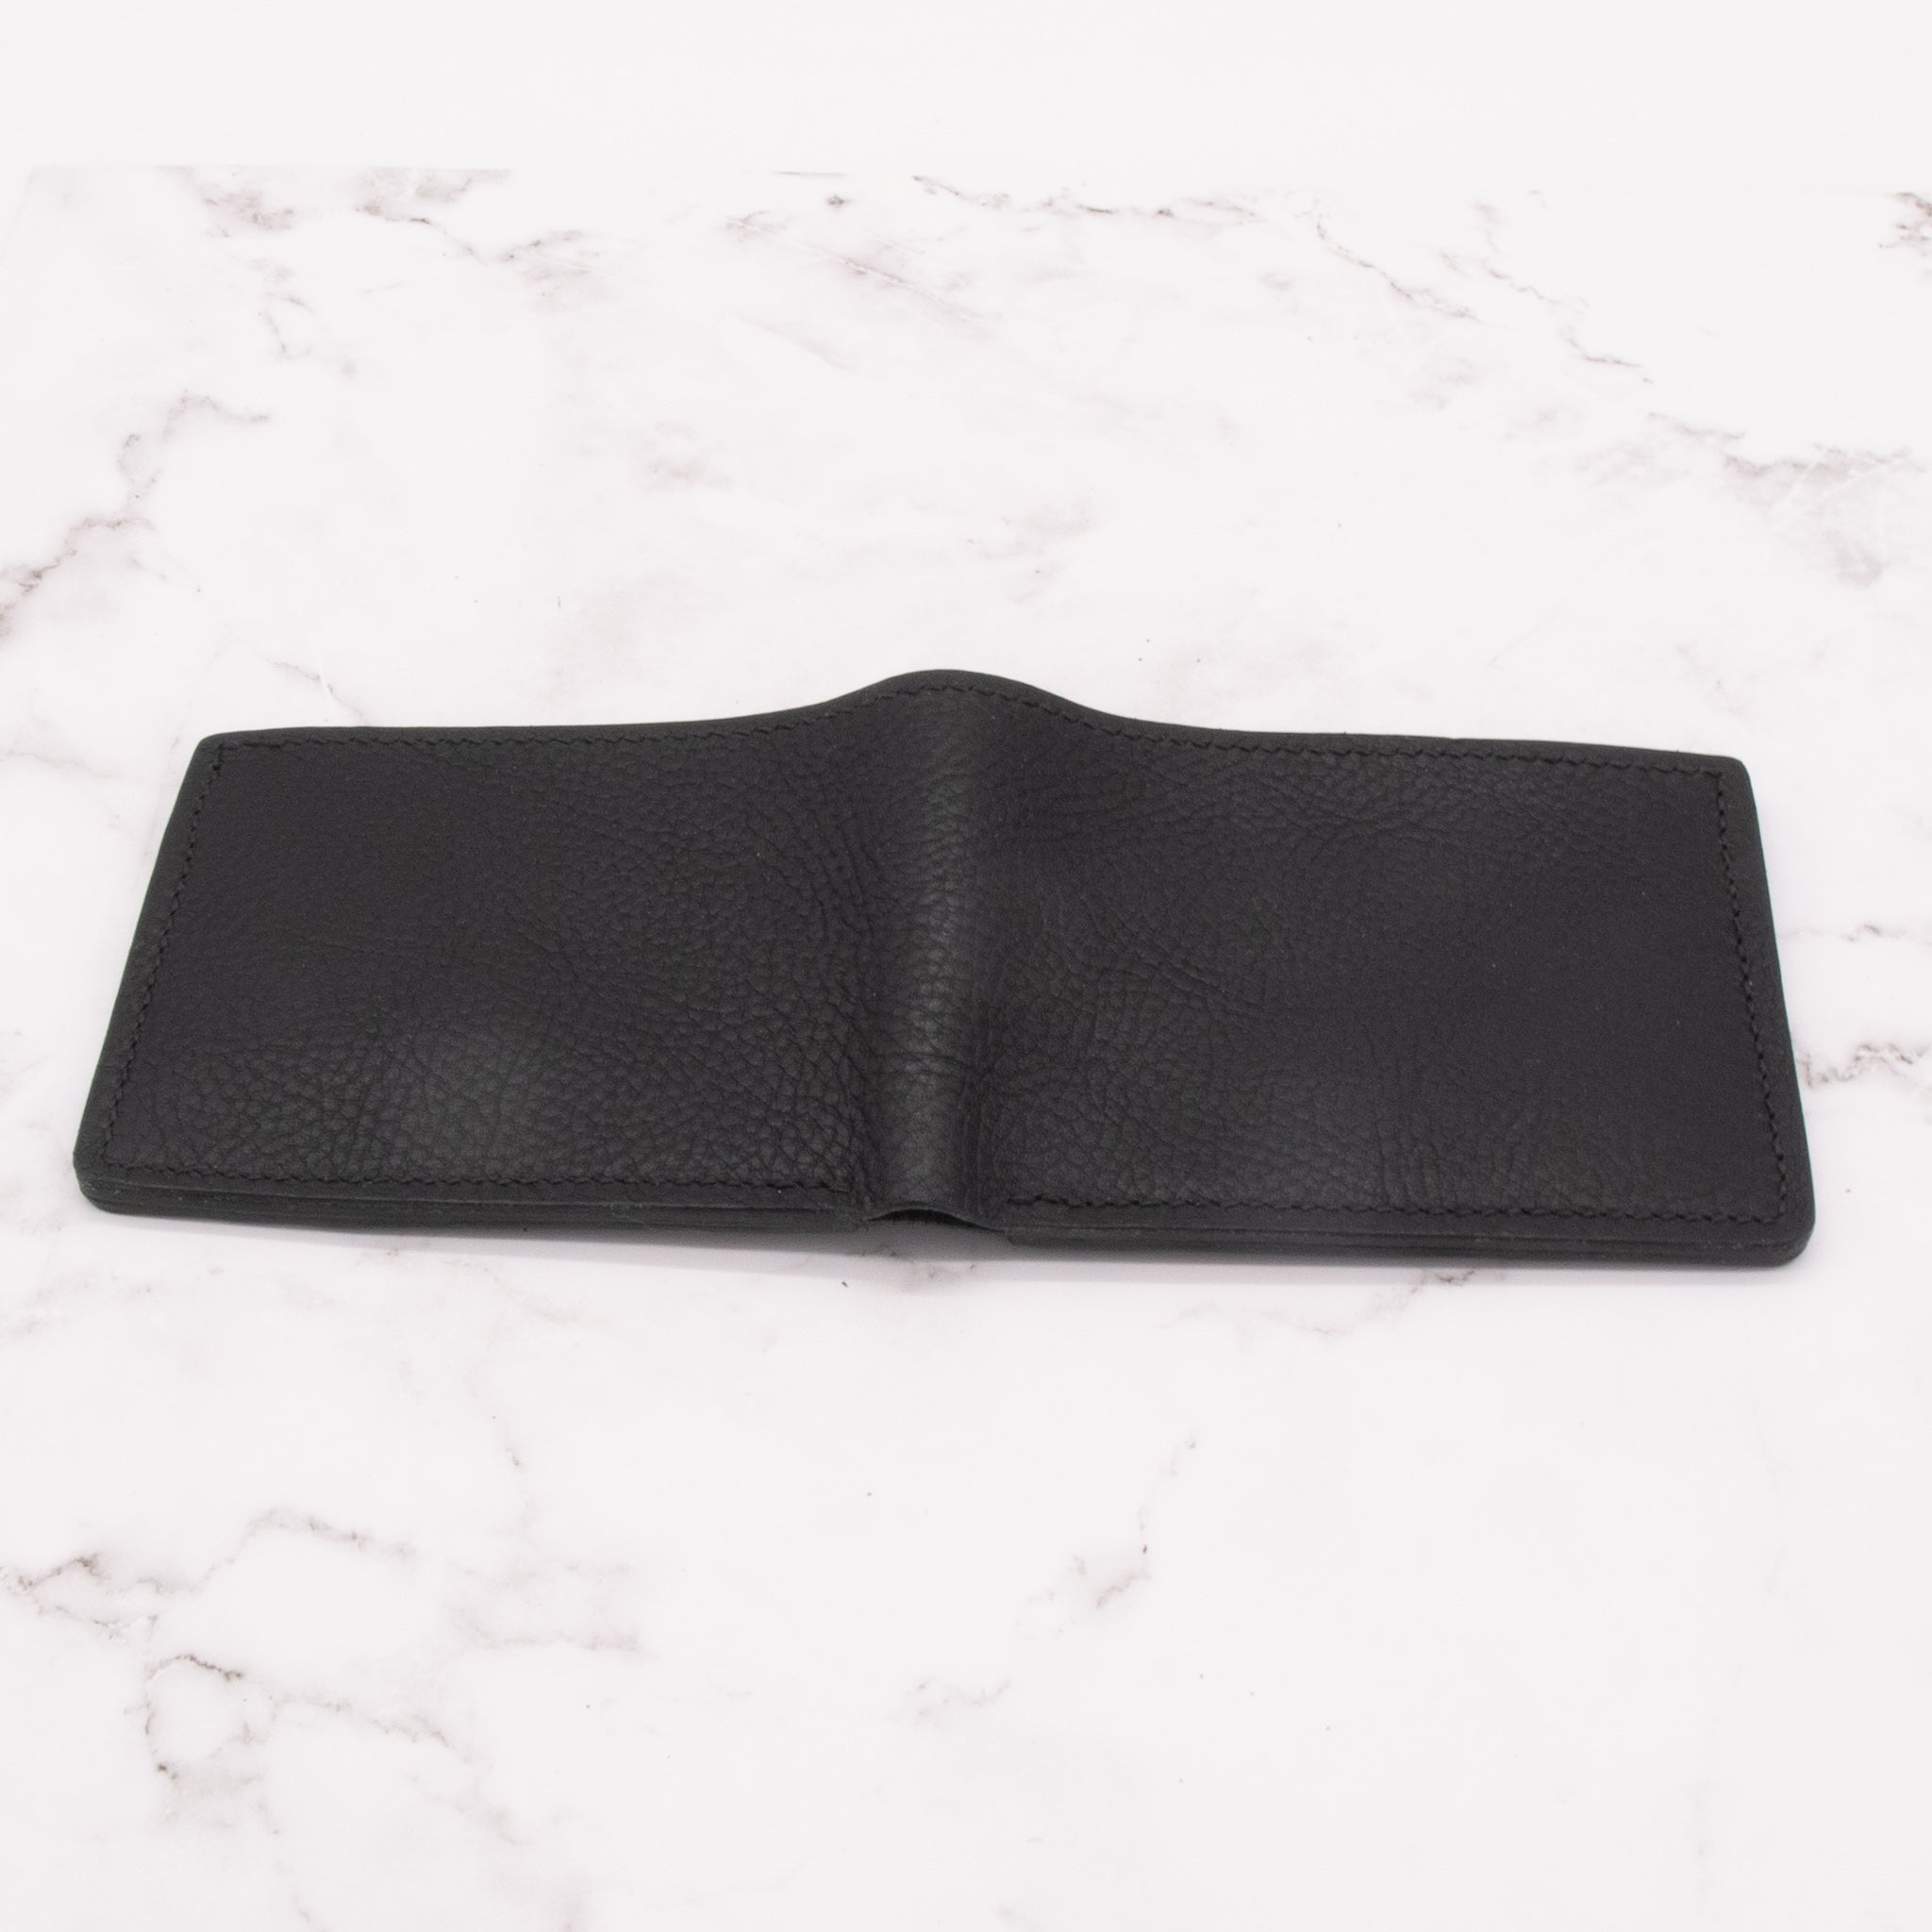 Classic Black Pebbled Leather Bifold Wallet